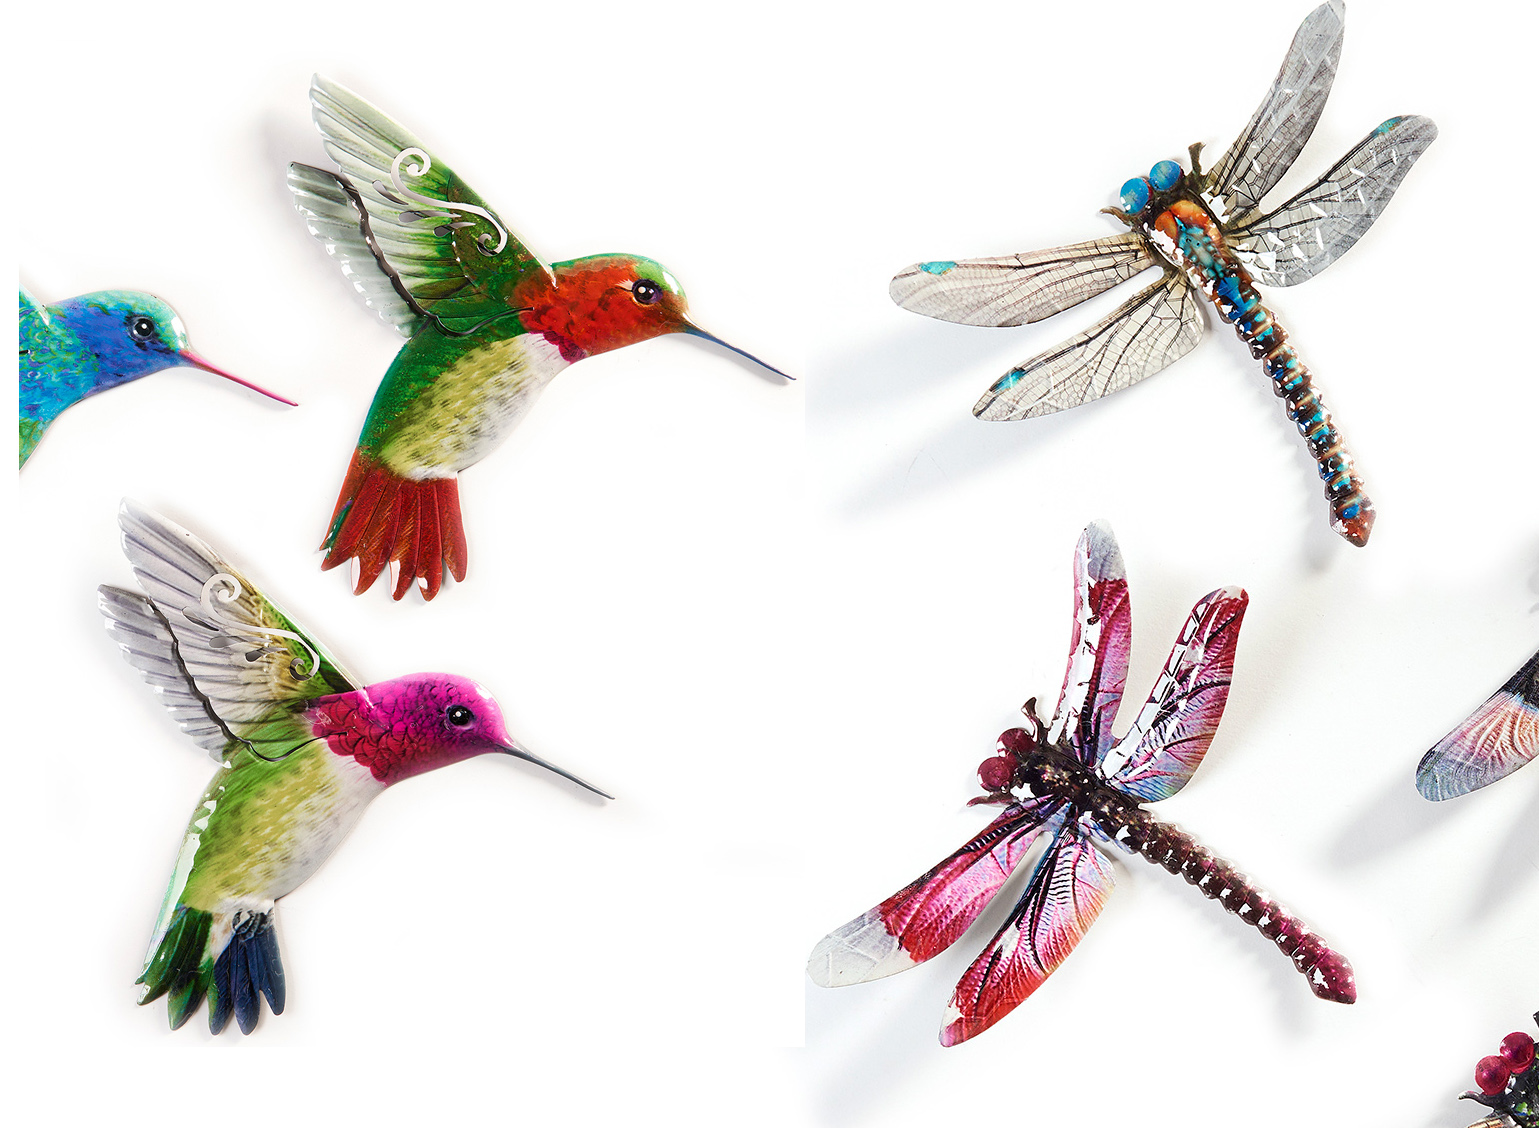 Colorful hummingbird and dragonfly art.